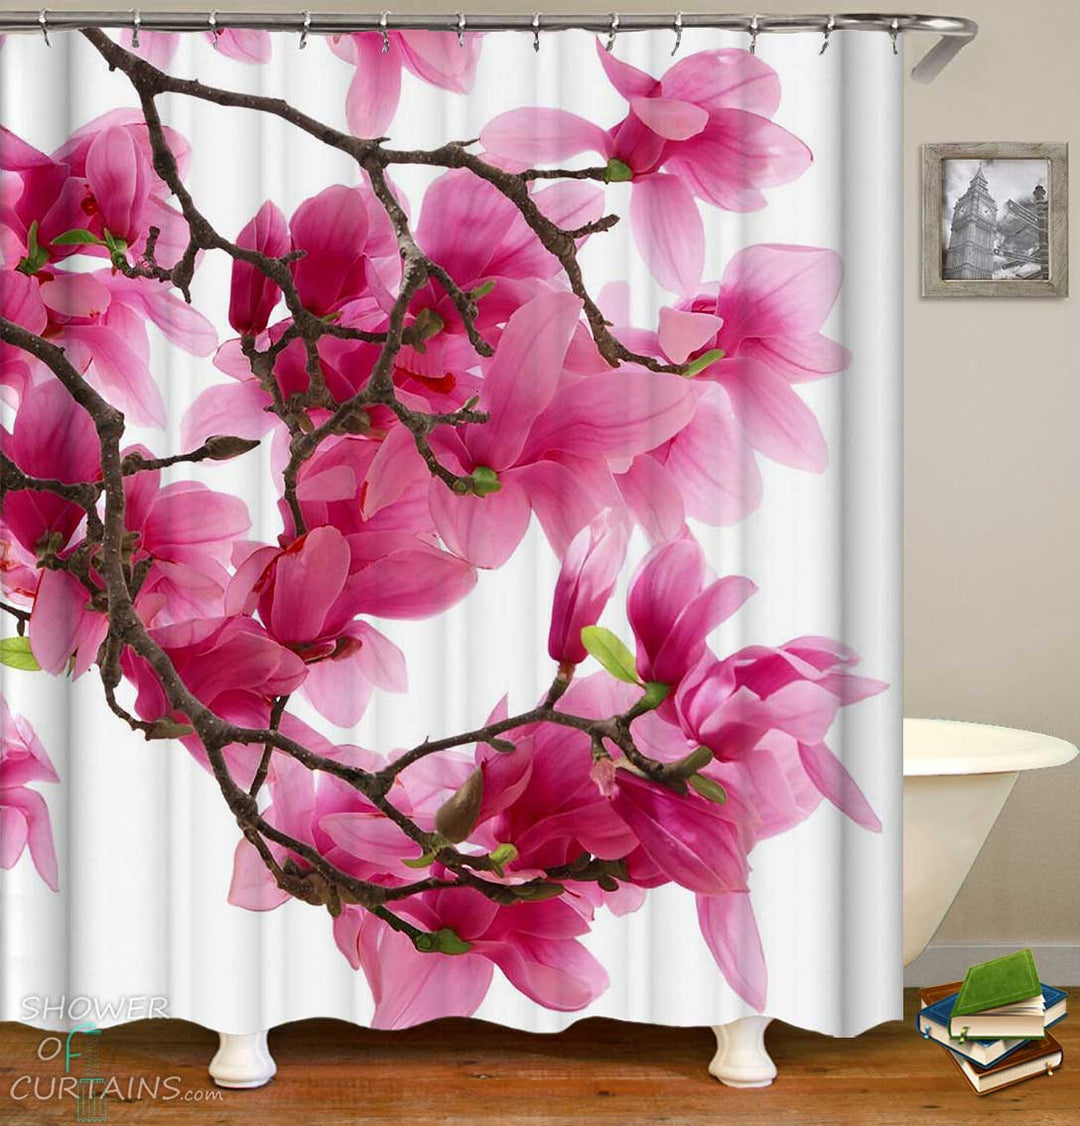 Shower Curtains with Shiny Pink Flowers